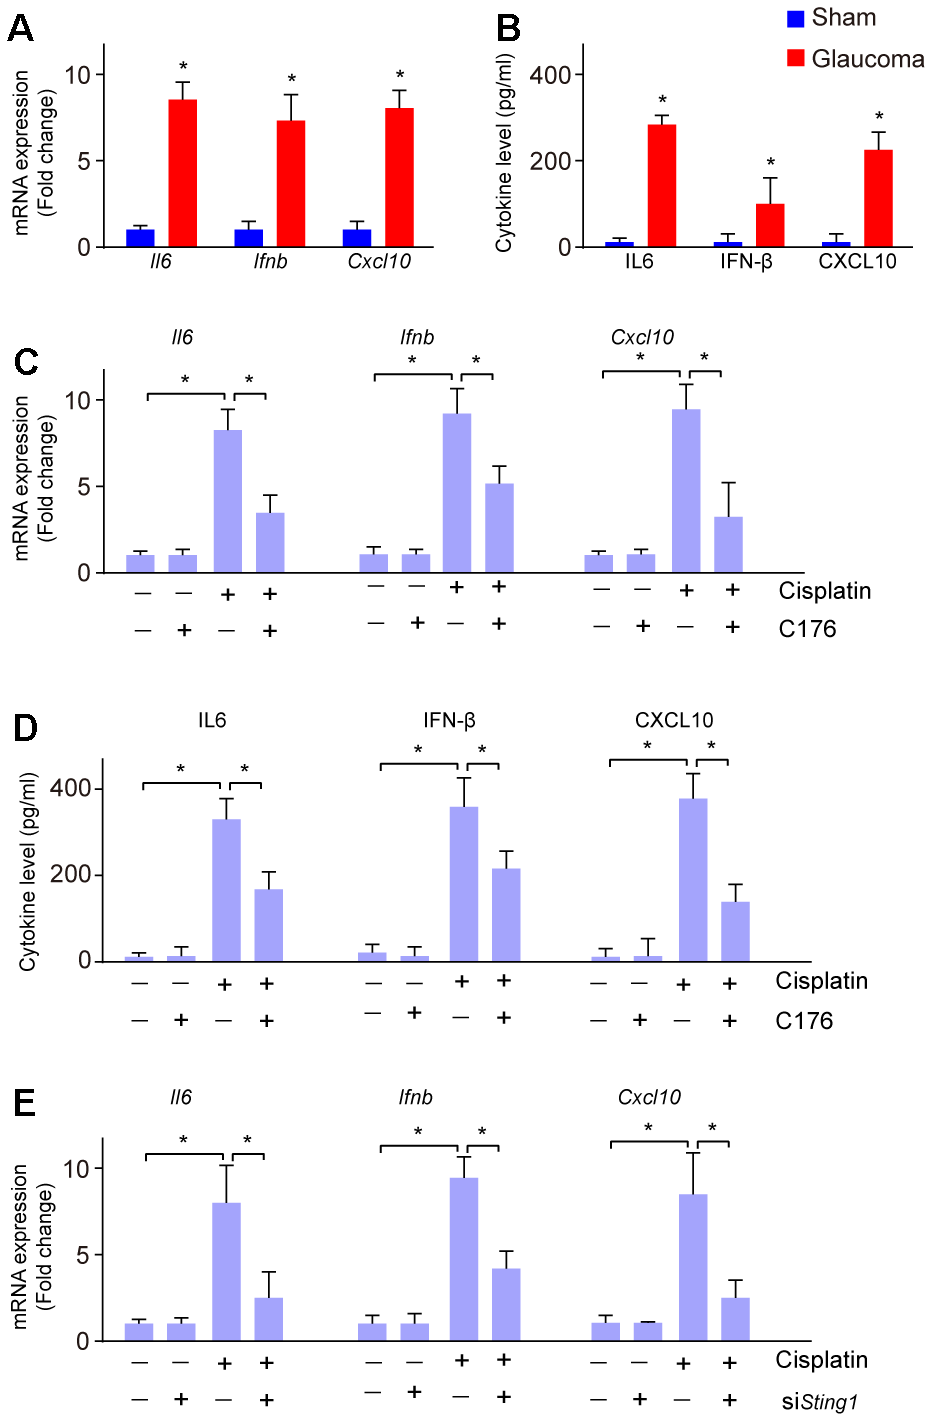 Inflammatory response to cGAS-STING activation in glaucoma. (A) The mRNA expression of Il6, Ifnb, and Cxcl10 in glaucoma was detected by real-time PCR. (B) ELISA analysis was conducted to measure the level of IL-6, IFN-β, and CXCL10 in glaucoma. (C) mRNA expression of Il6, Ifnb, and Cxcl10 in RGC-5 cells treated with cisplatin, followed by C176 was detected by real-time PCR. (D) The cytokine level of Il6, Ifnb, and Cxcl10 in RGC-5 cells treated with cisplatin, followed by C176 was detected by ELISA. (E) Genetic inhibition of cGAS-STING combined with cisplatin on the expression of Il6, Ifnb, and Cxcl10 in RGC-5 cells was detected by real-time PCR. *p